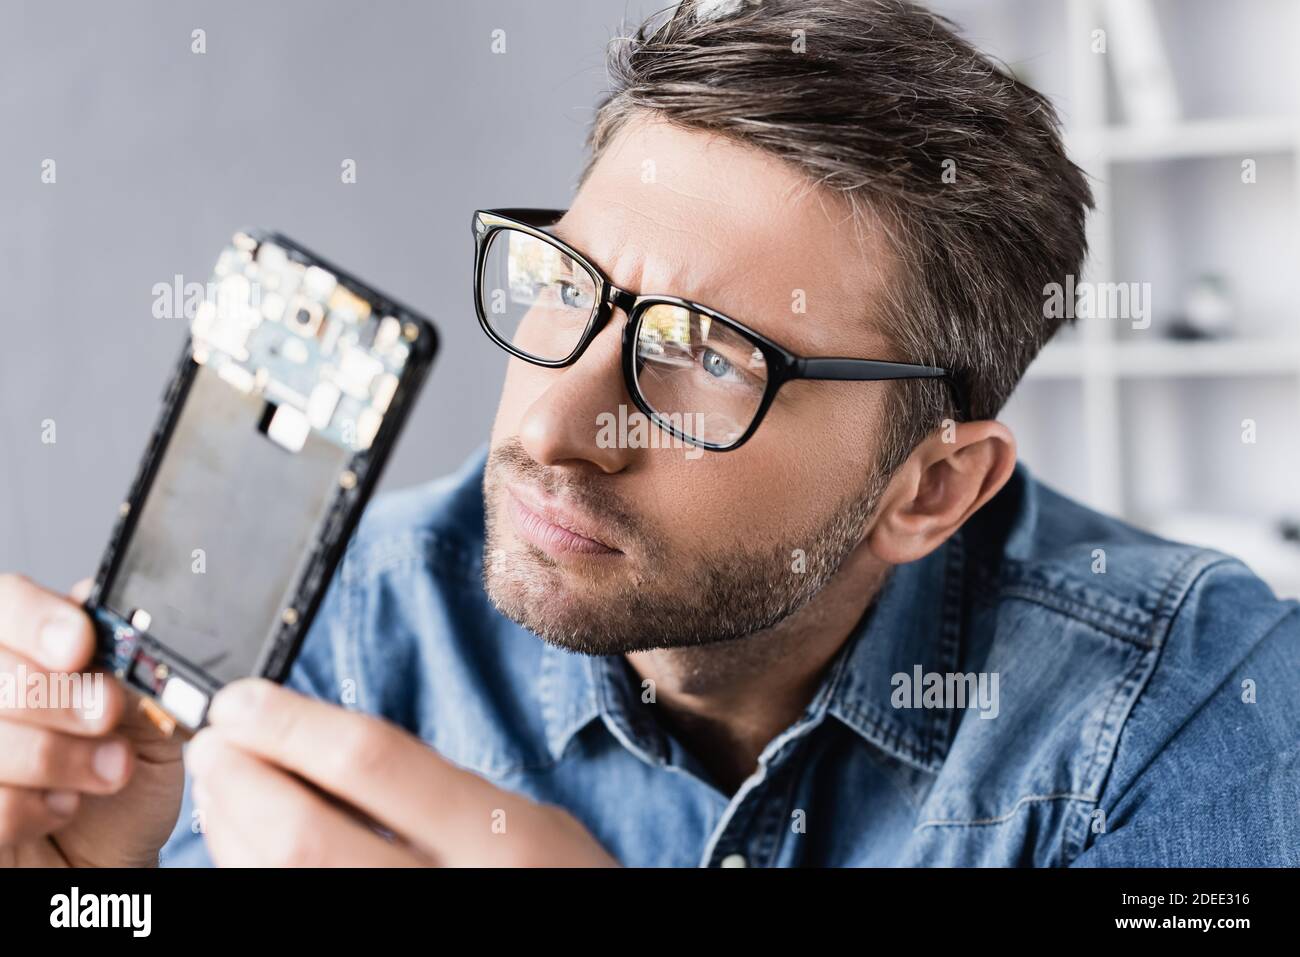 Concentrated repairman in eyeglasses looking at disassembled part of mobile phone on blurred foreground Stock Photo